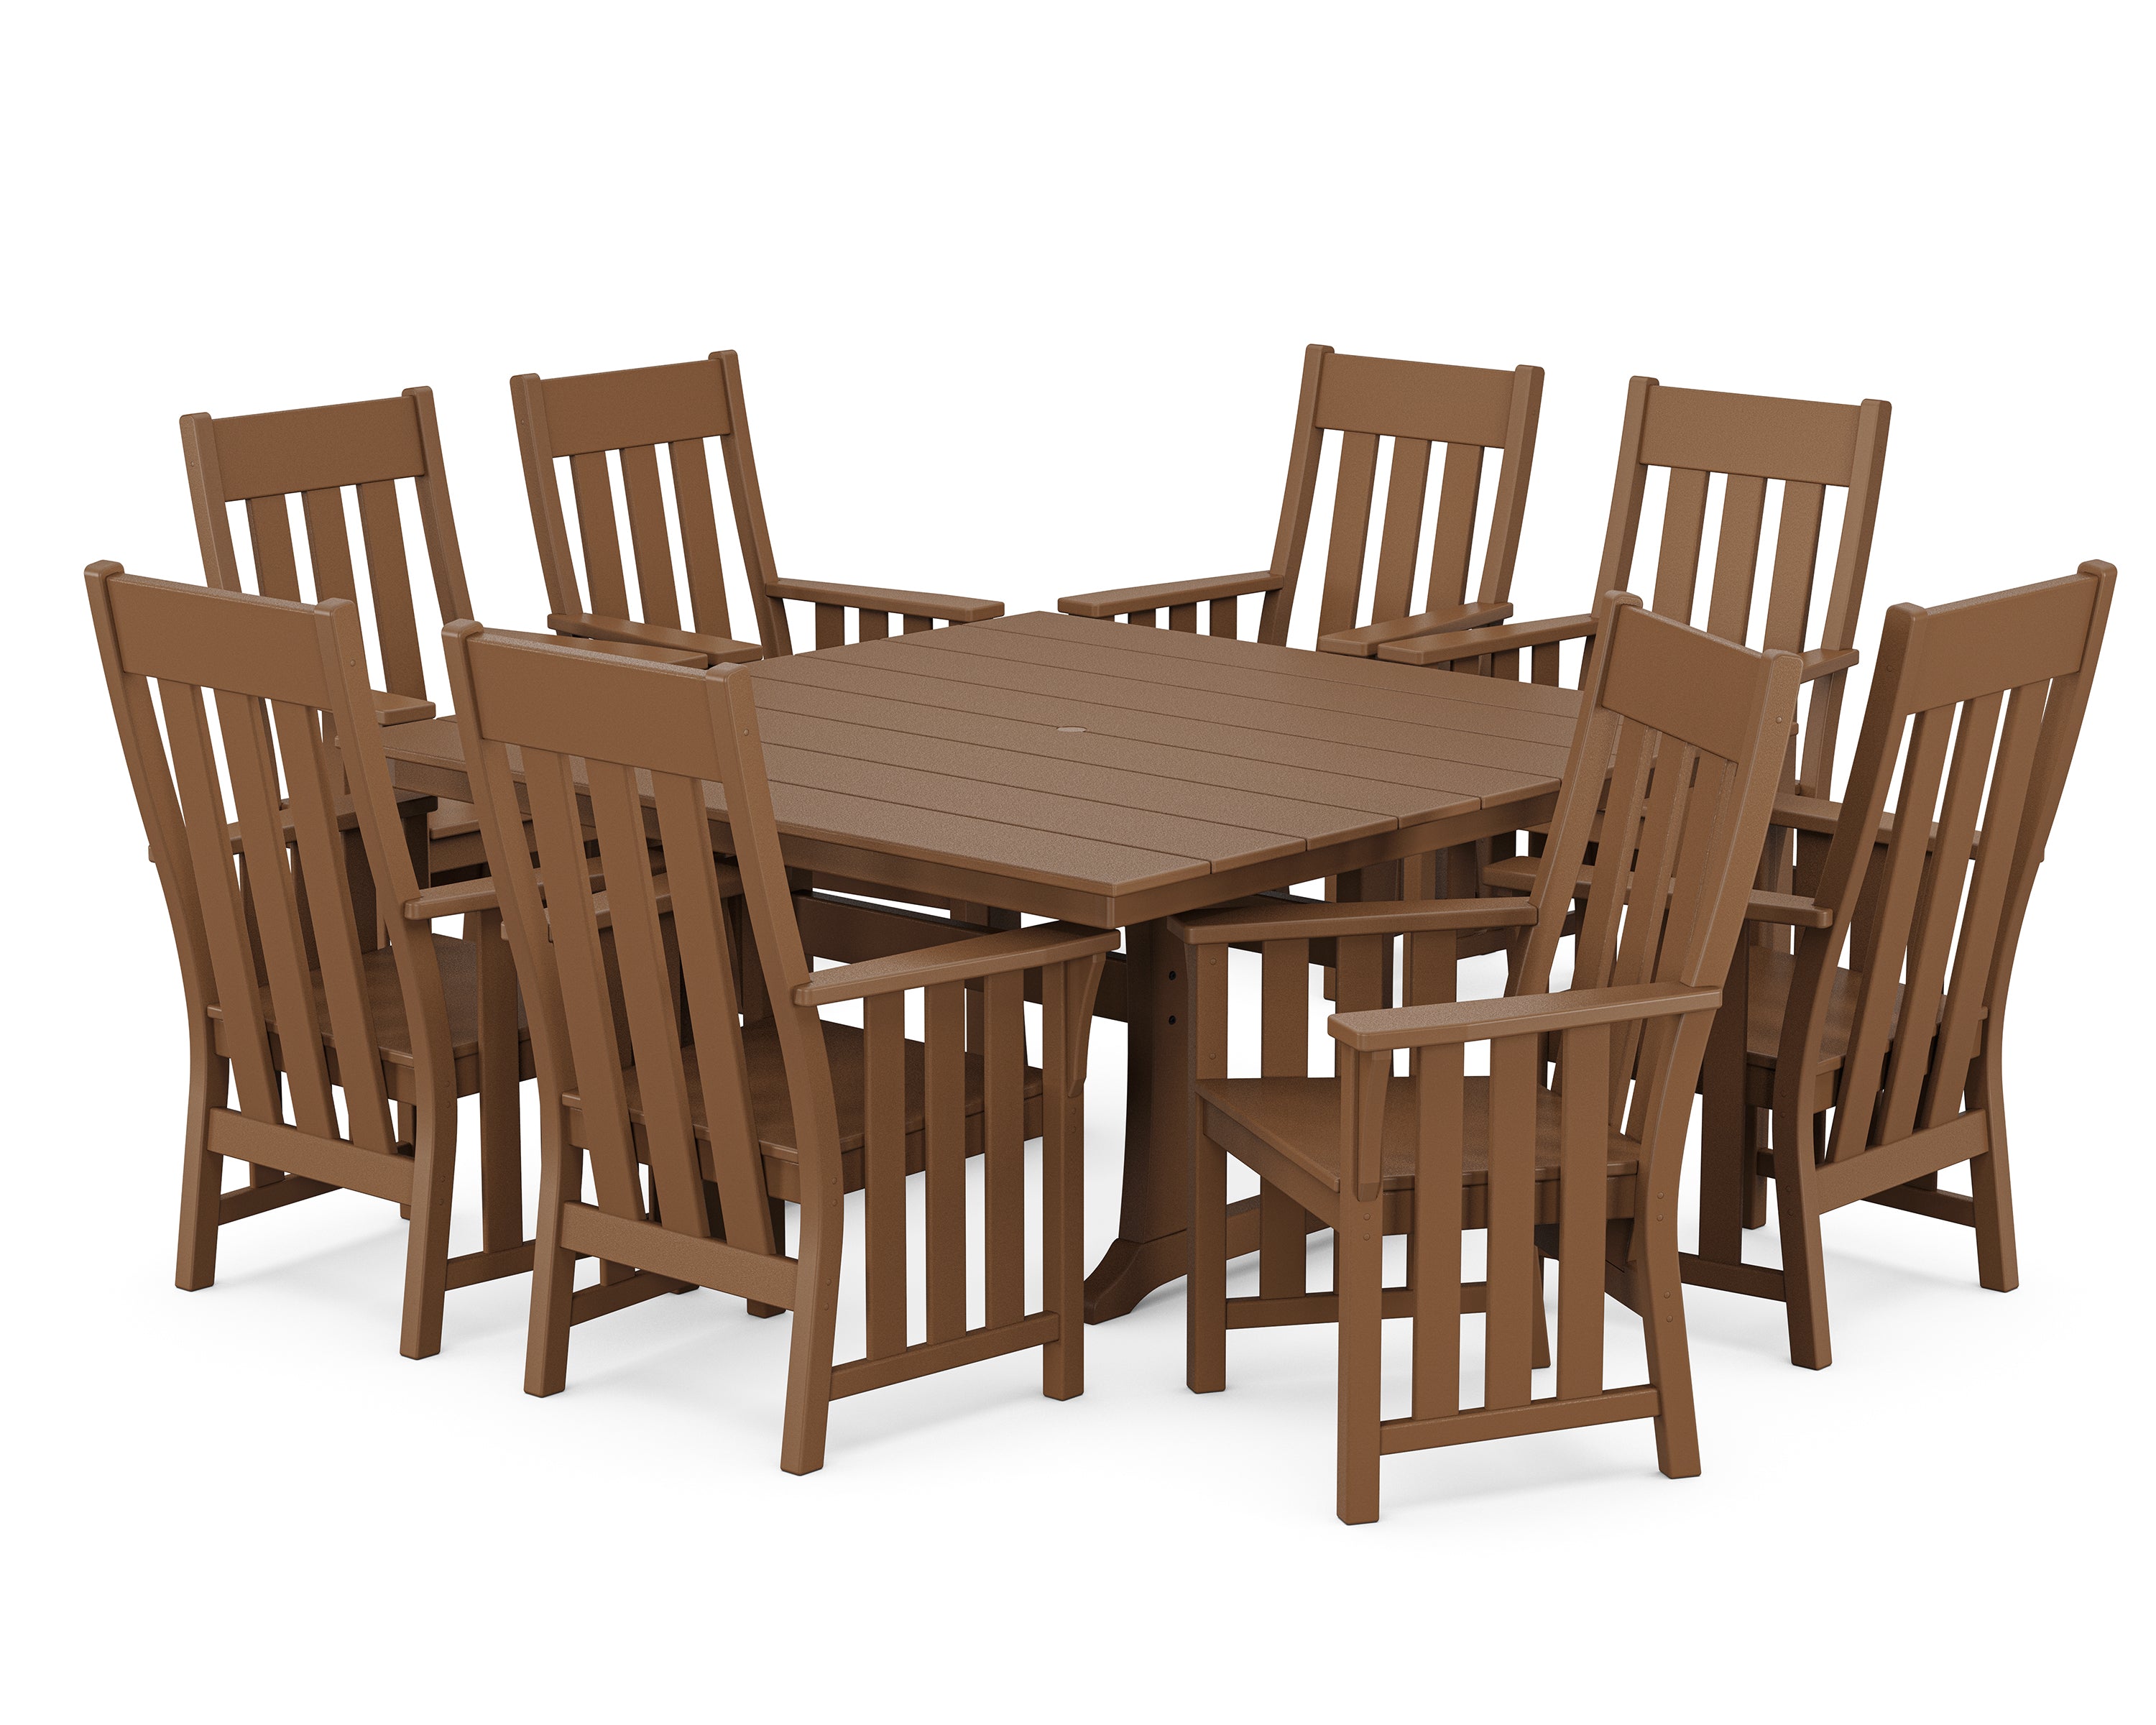 Martha Stewart by POLYWOOD® Acadia 9-Piece Square Farmhouse Dining Set with Trestle Legs in Teak